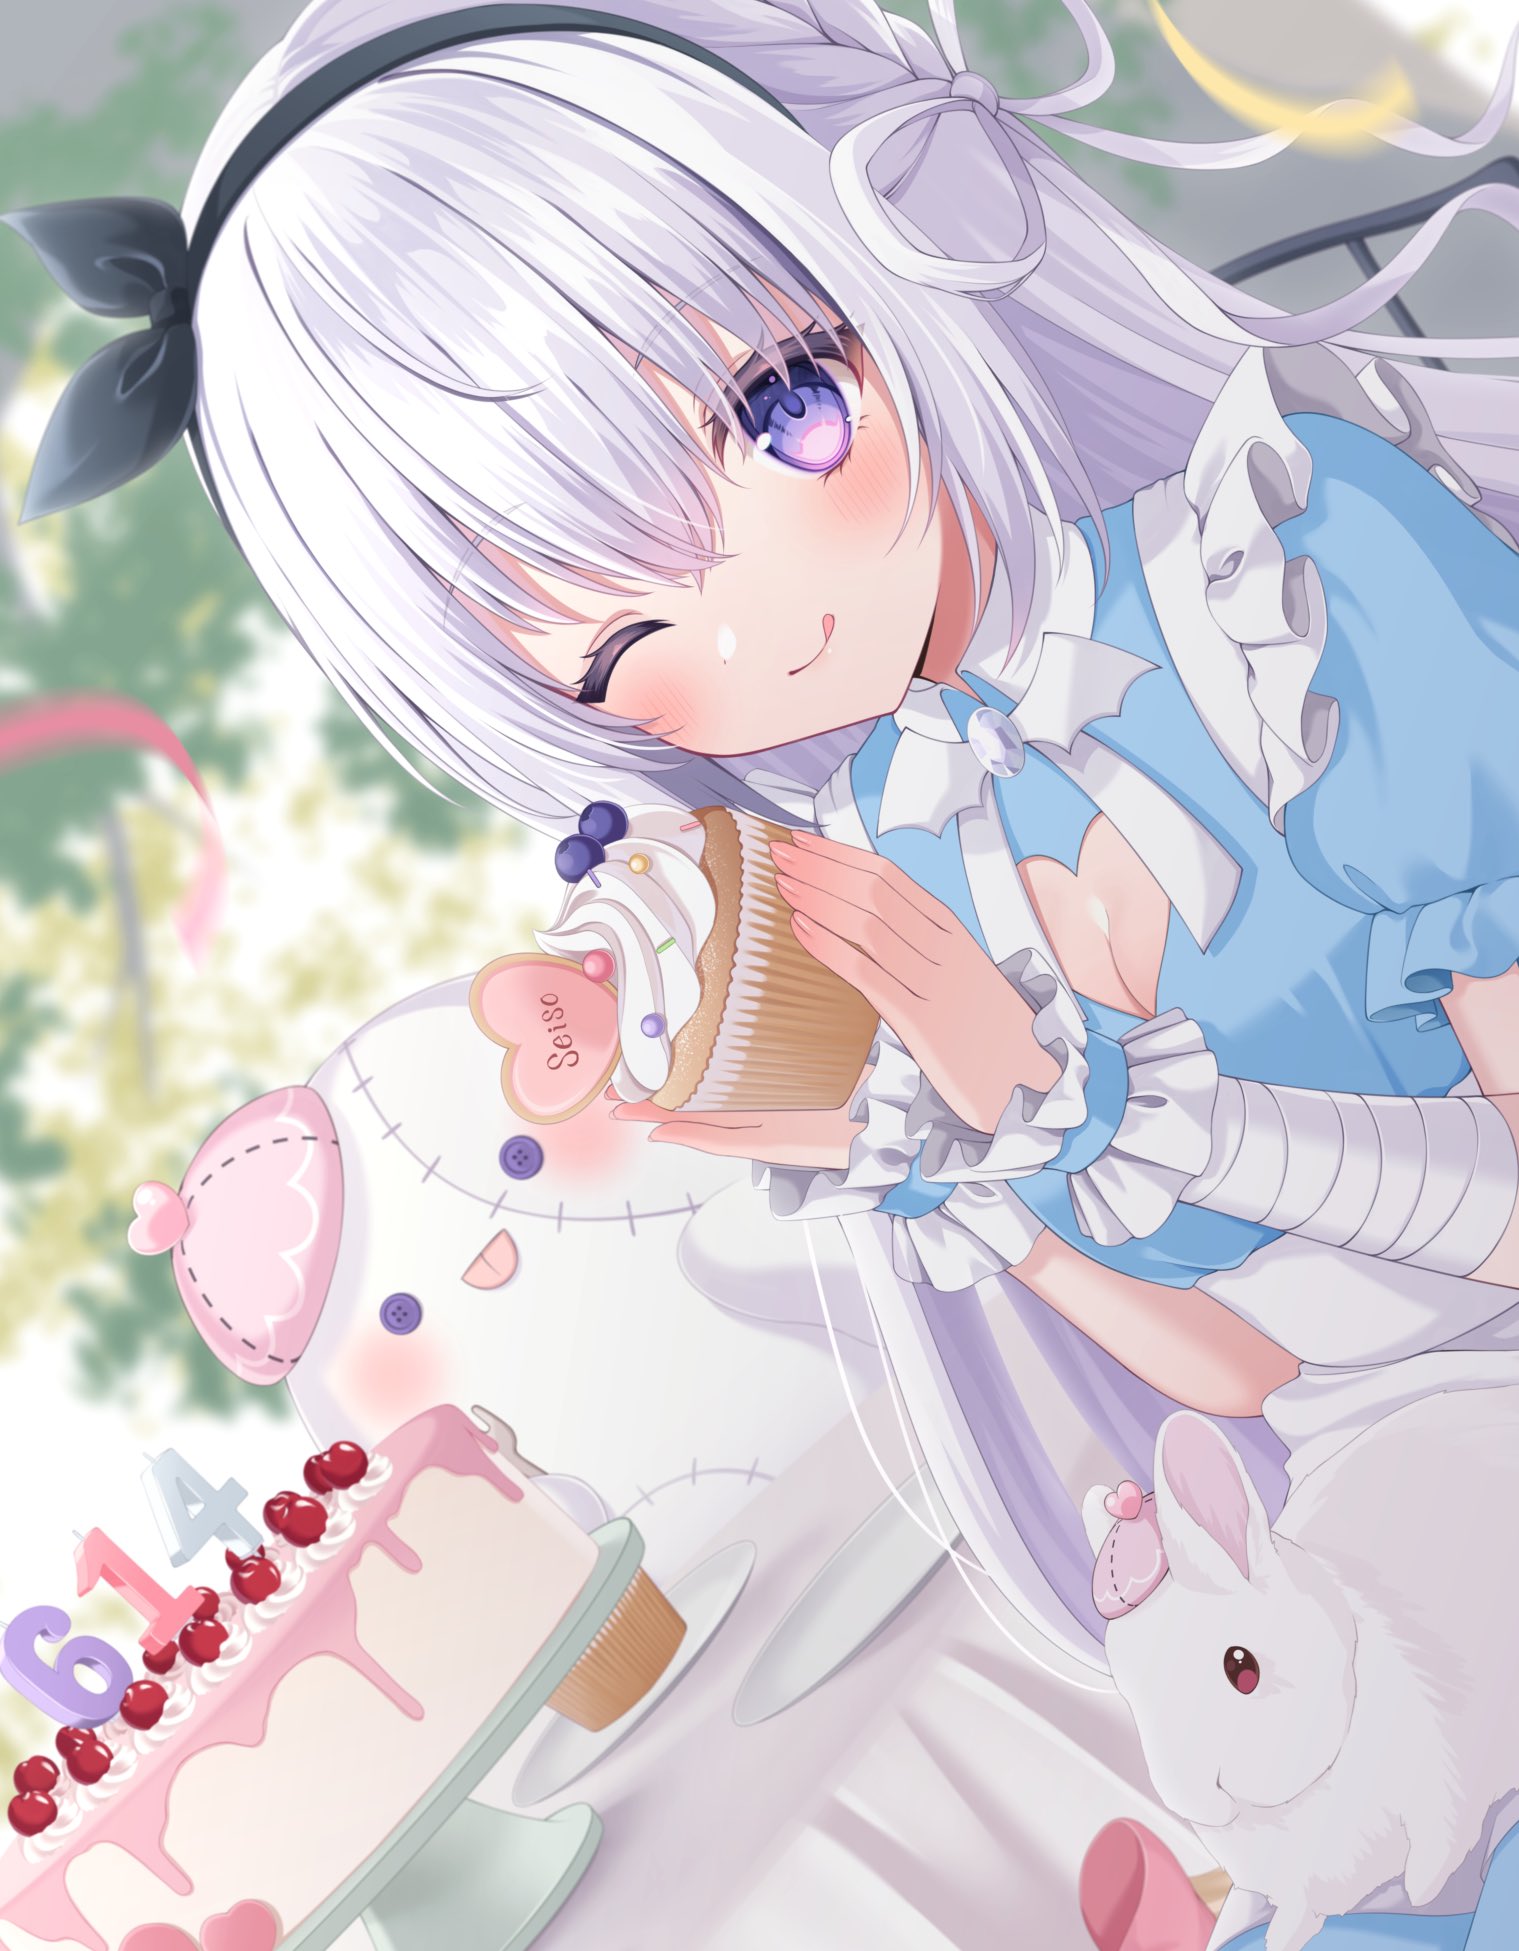 Anime Girls Long Hair Tongue Out Portrait Display Blushing Cupcakes Cake Sweets One Eye Closed White 1519x1951